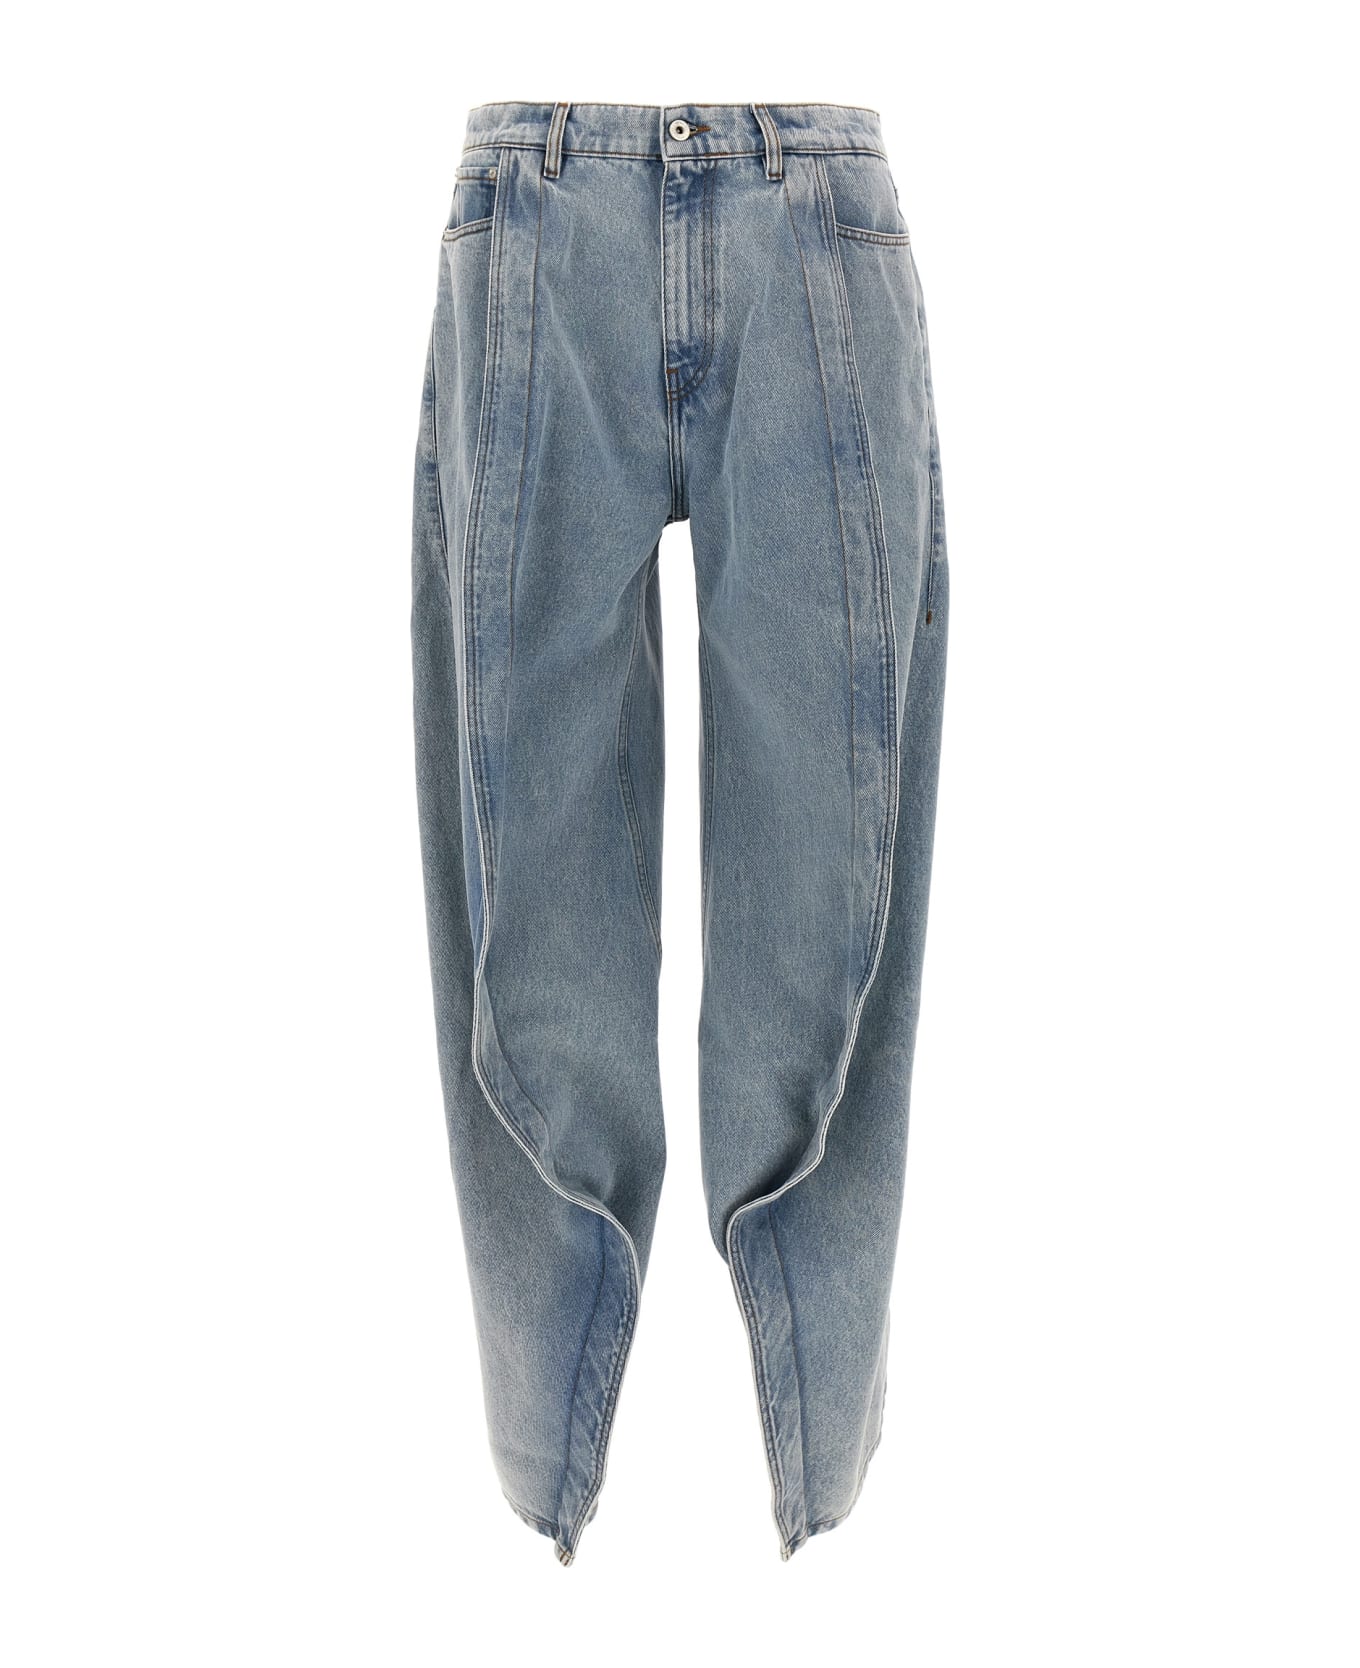 Y/Project 'evergreen Banana' Jeans - Light Blue name:463